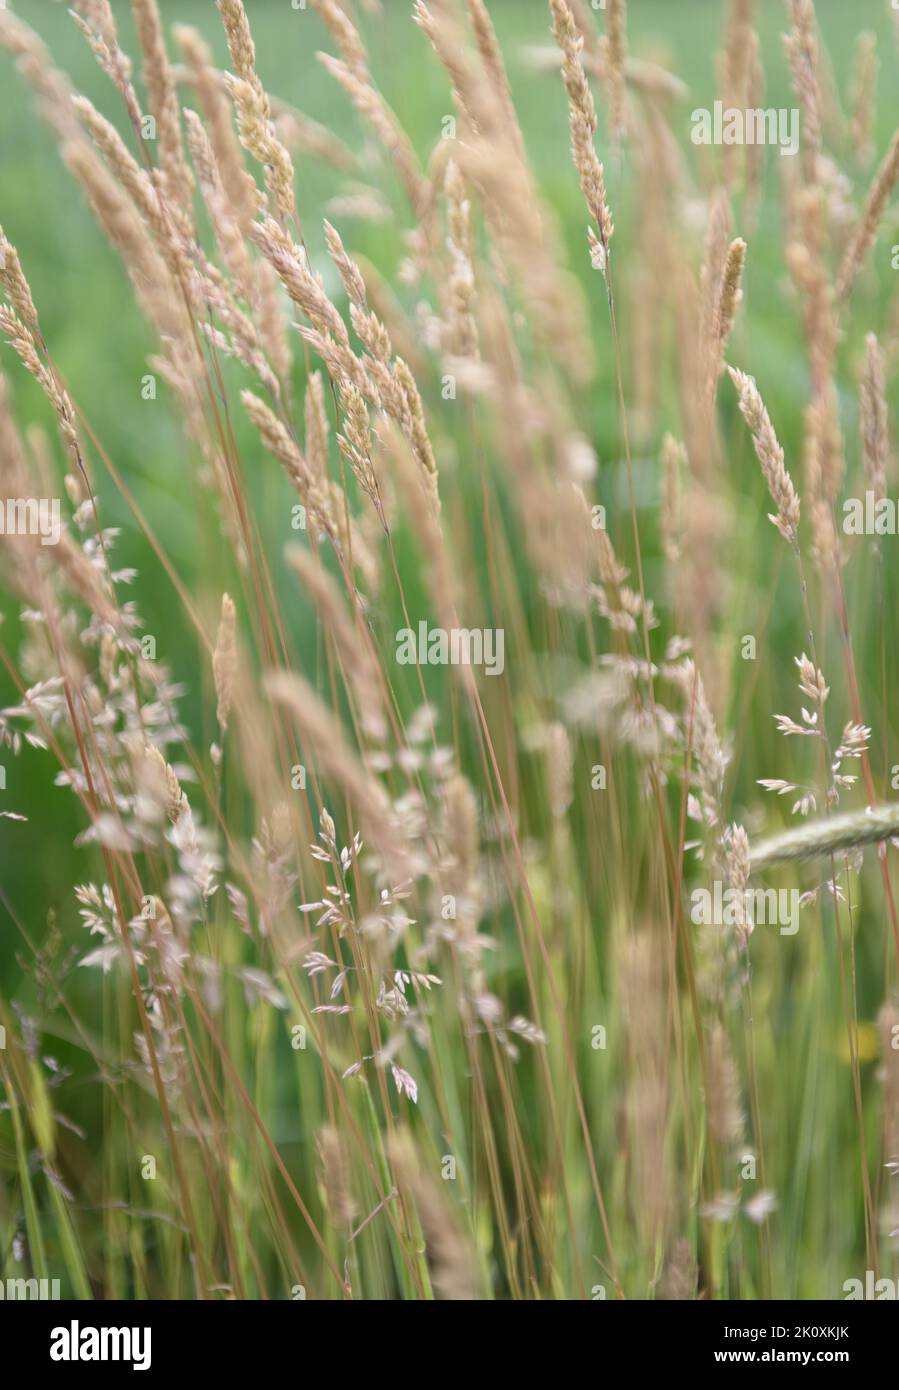 Field of grass in the countryside, natural wallpaper or background with selective focus Stock Photo